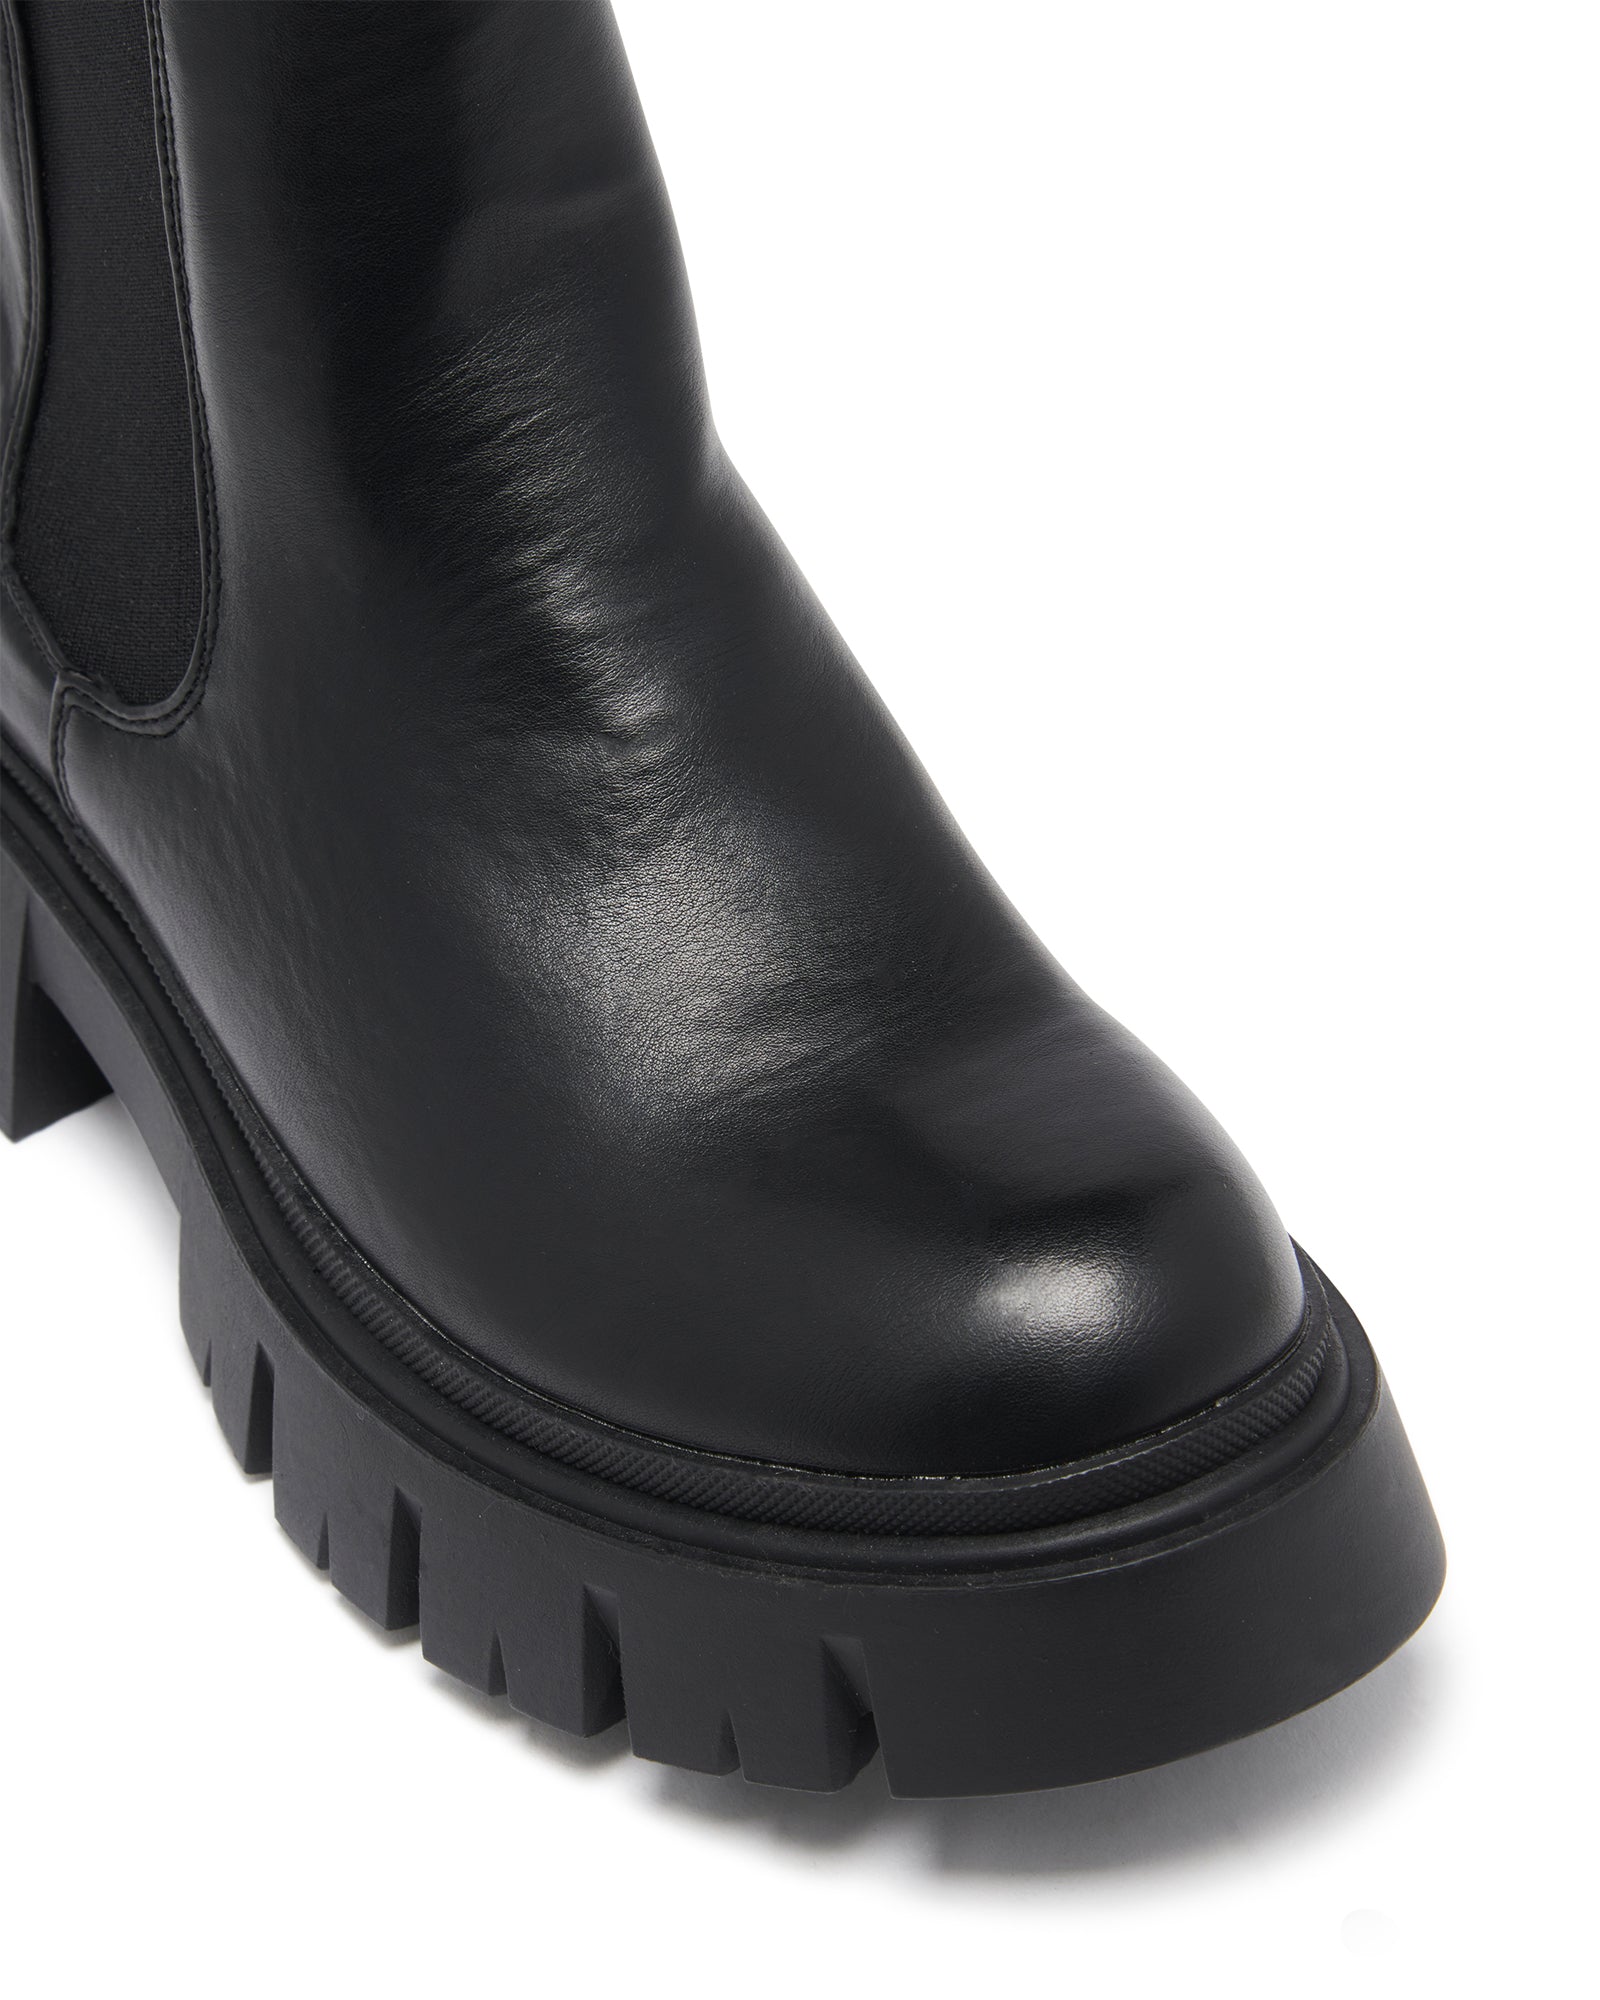 Therapy Shoes Idol Black | Women's Boots | Ankle | Chunky | 90's | Gusset